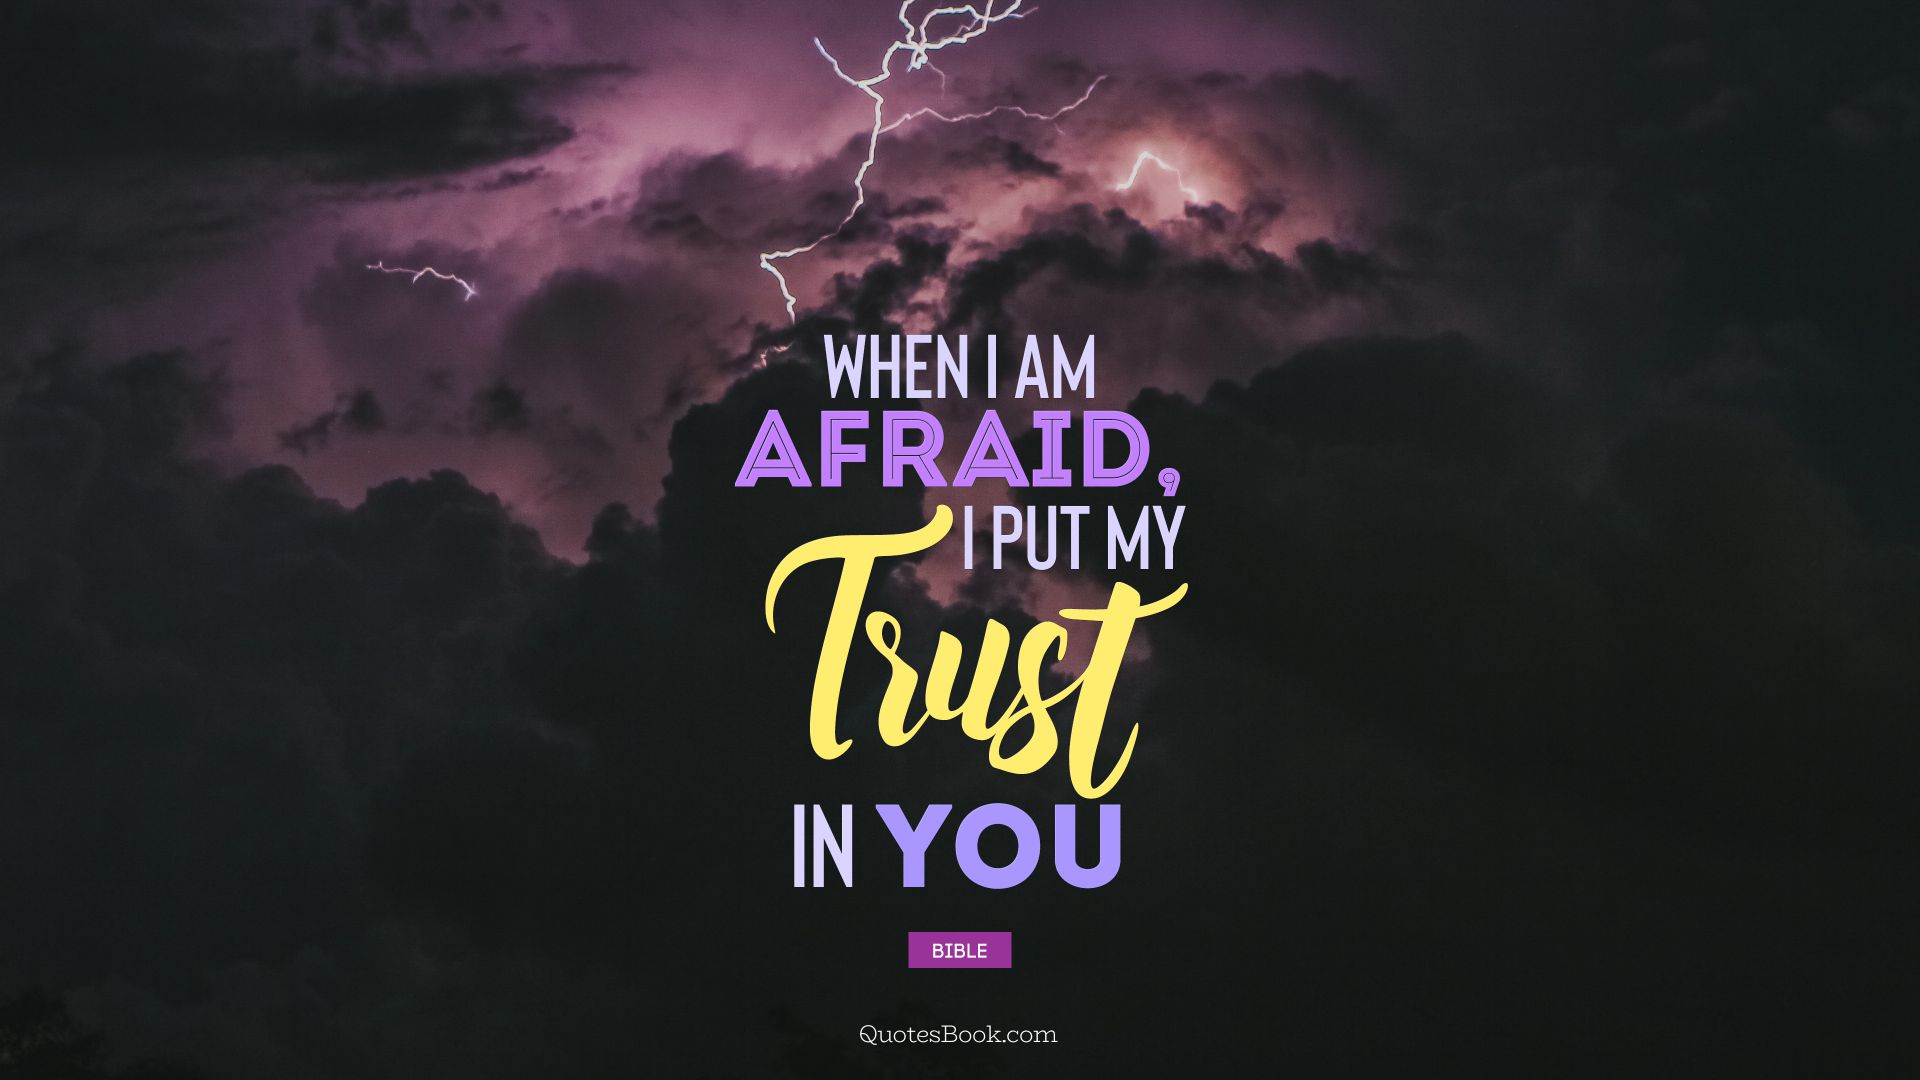 When I am afraid, I put my trust in you. - Quote by Bible